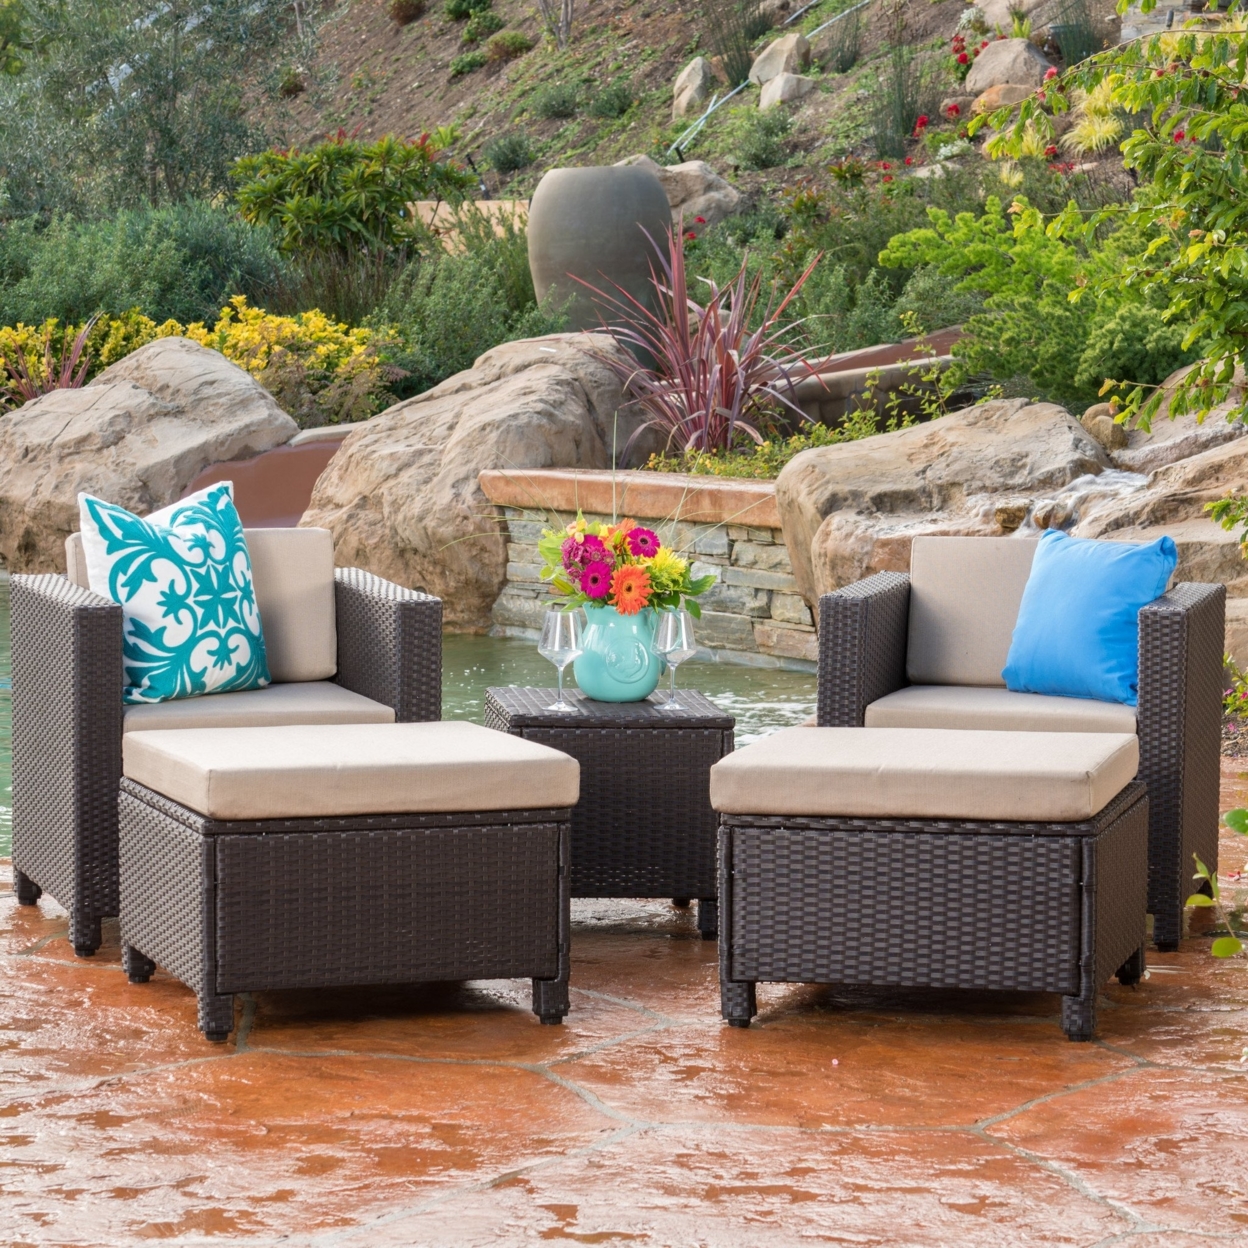 Budva Outdoor 5pc Chat Set With Cushions - Dark Brown Wicker